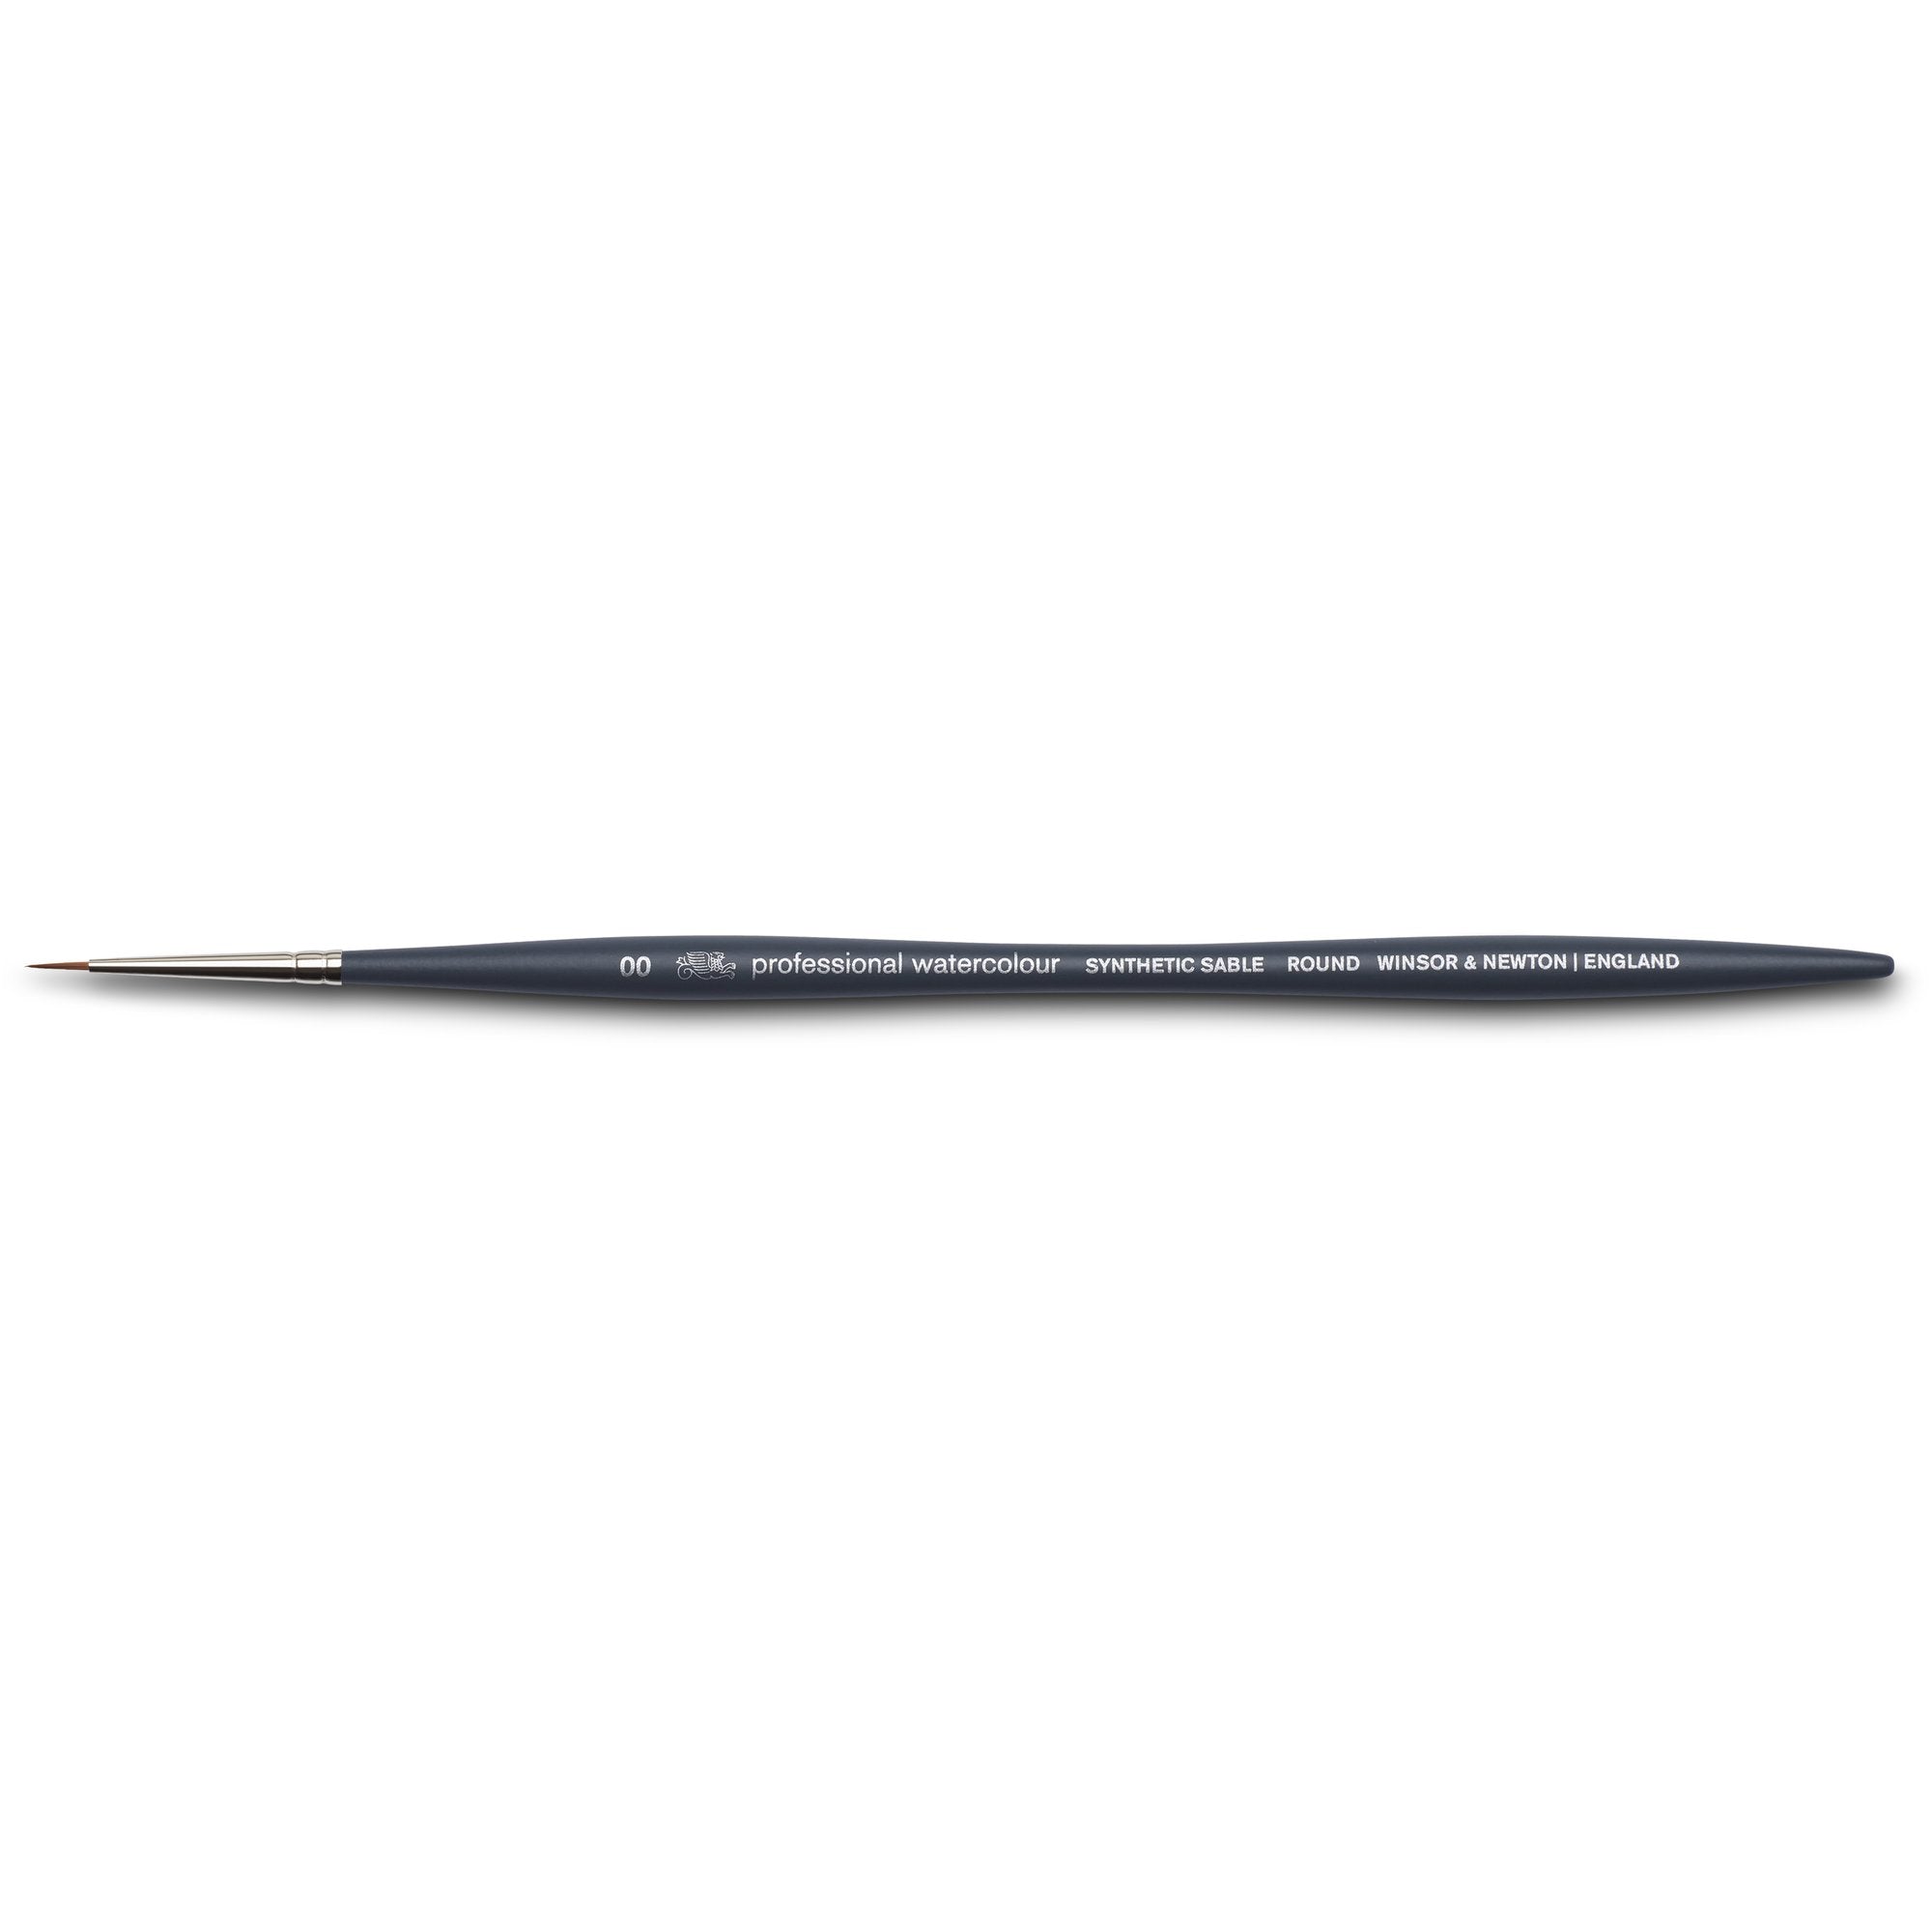 Winsor & Newton Professional Watercolor Synthetic Sable Brush - Mop 1